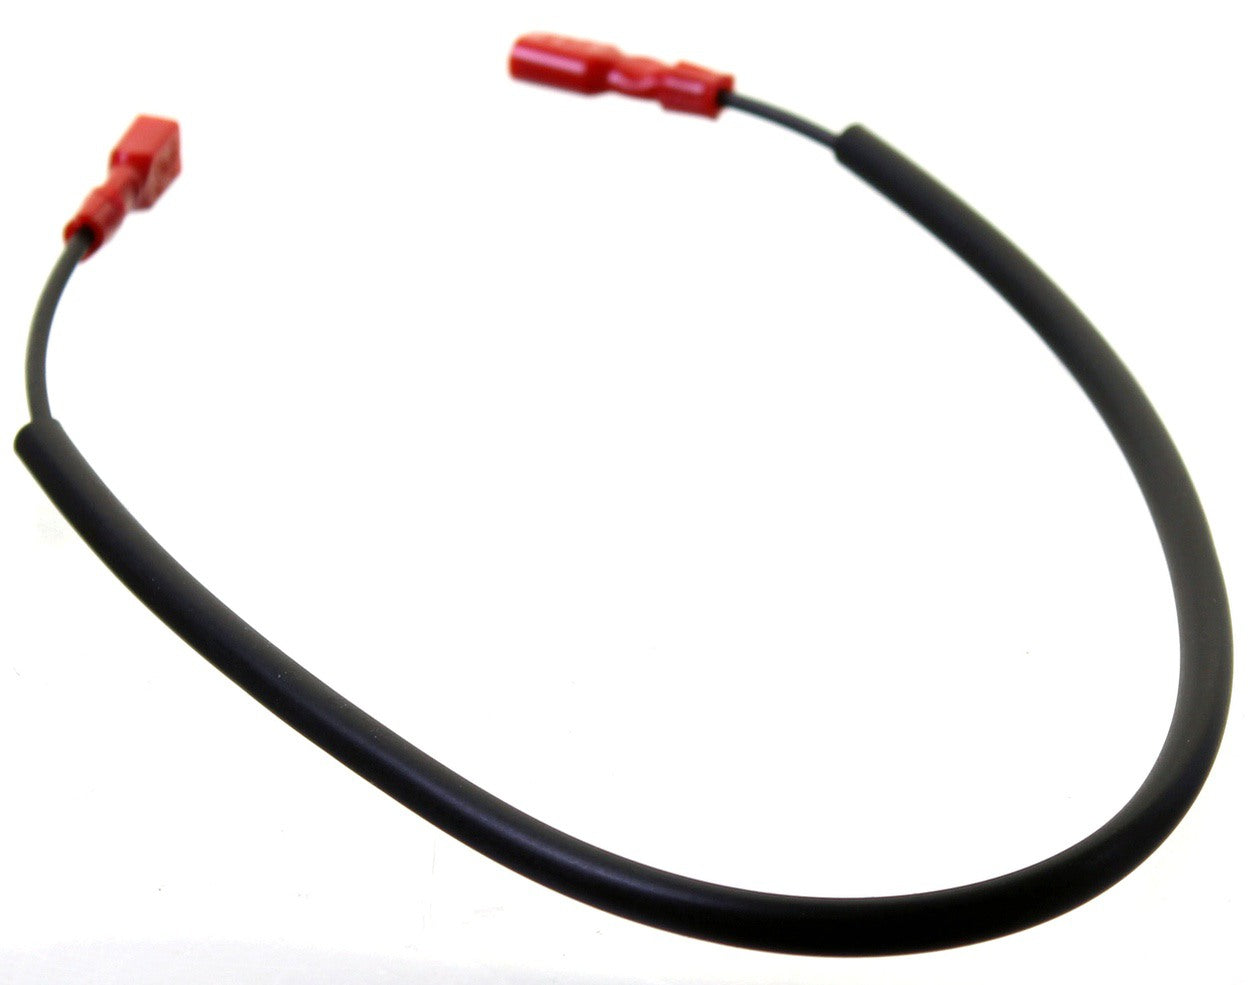 Iame Stop Switch Leads With Connectors for M1 & Gazelle